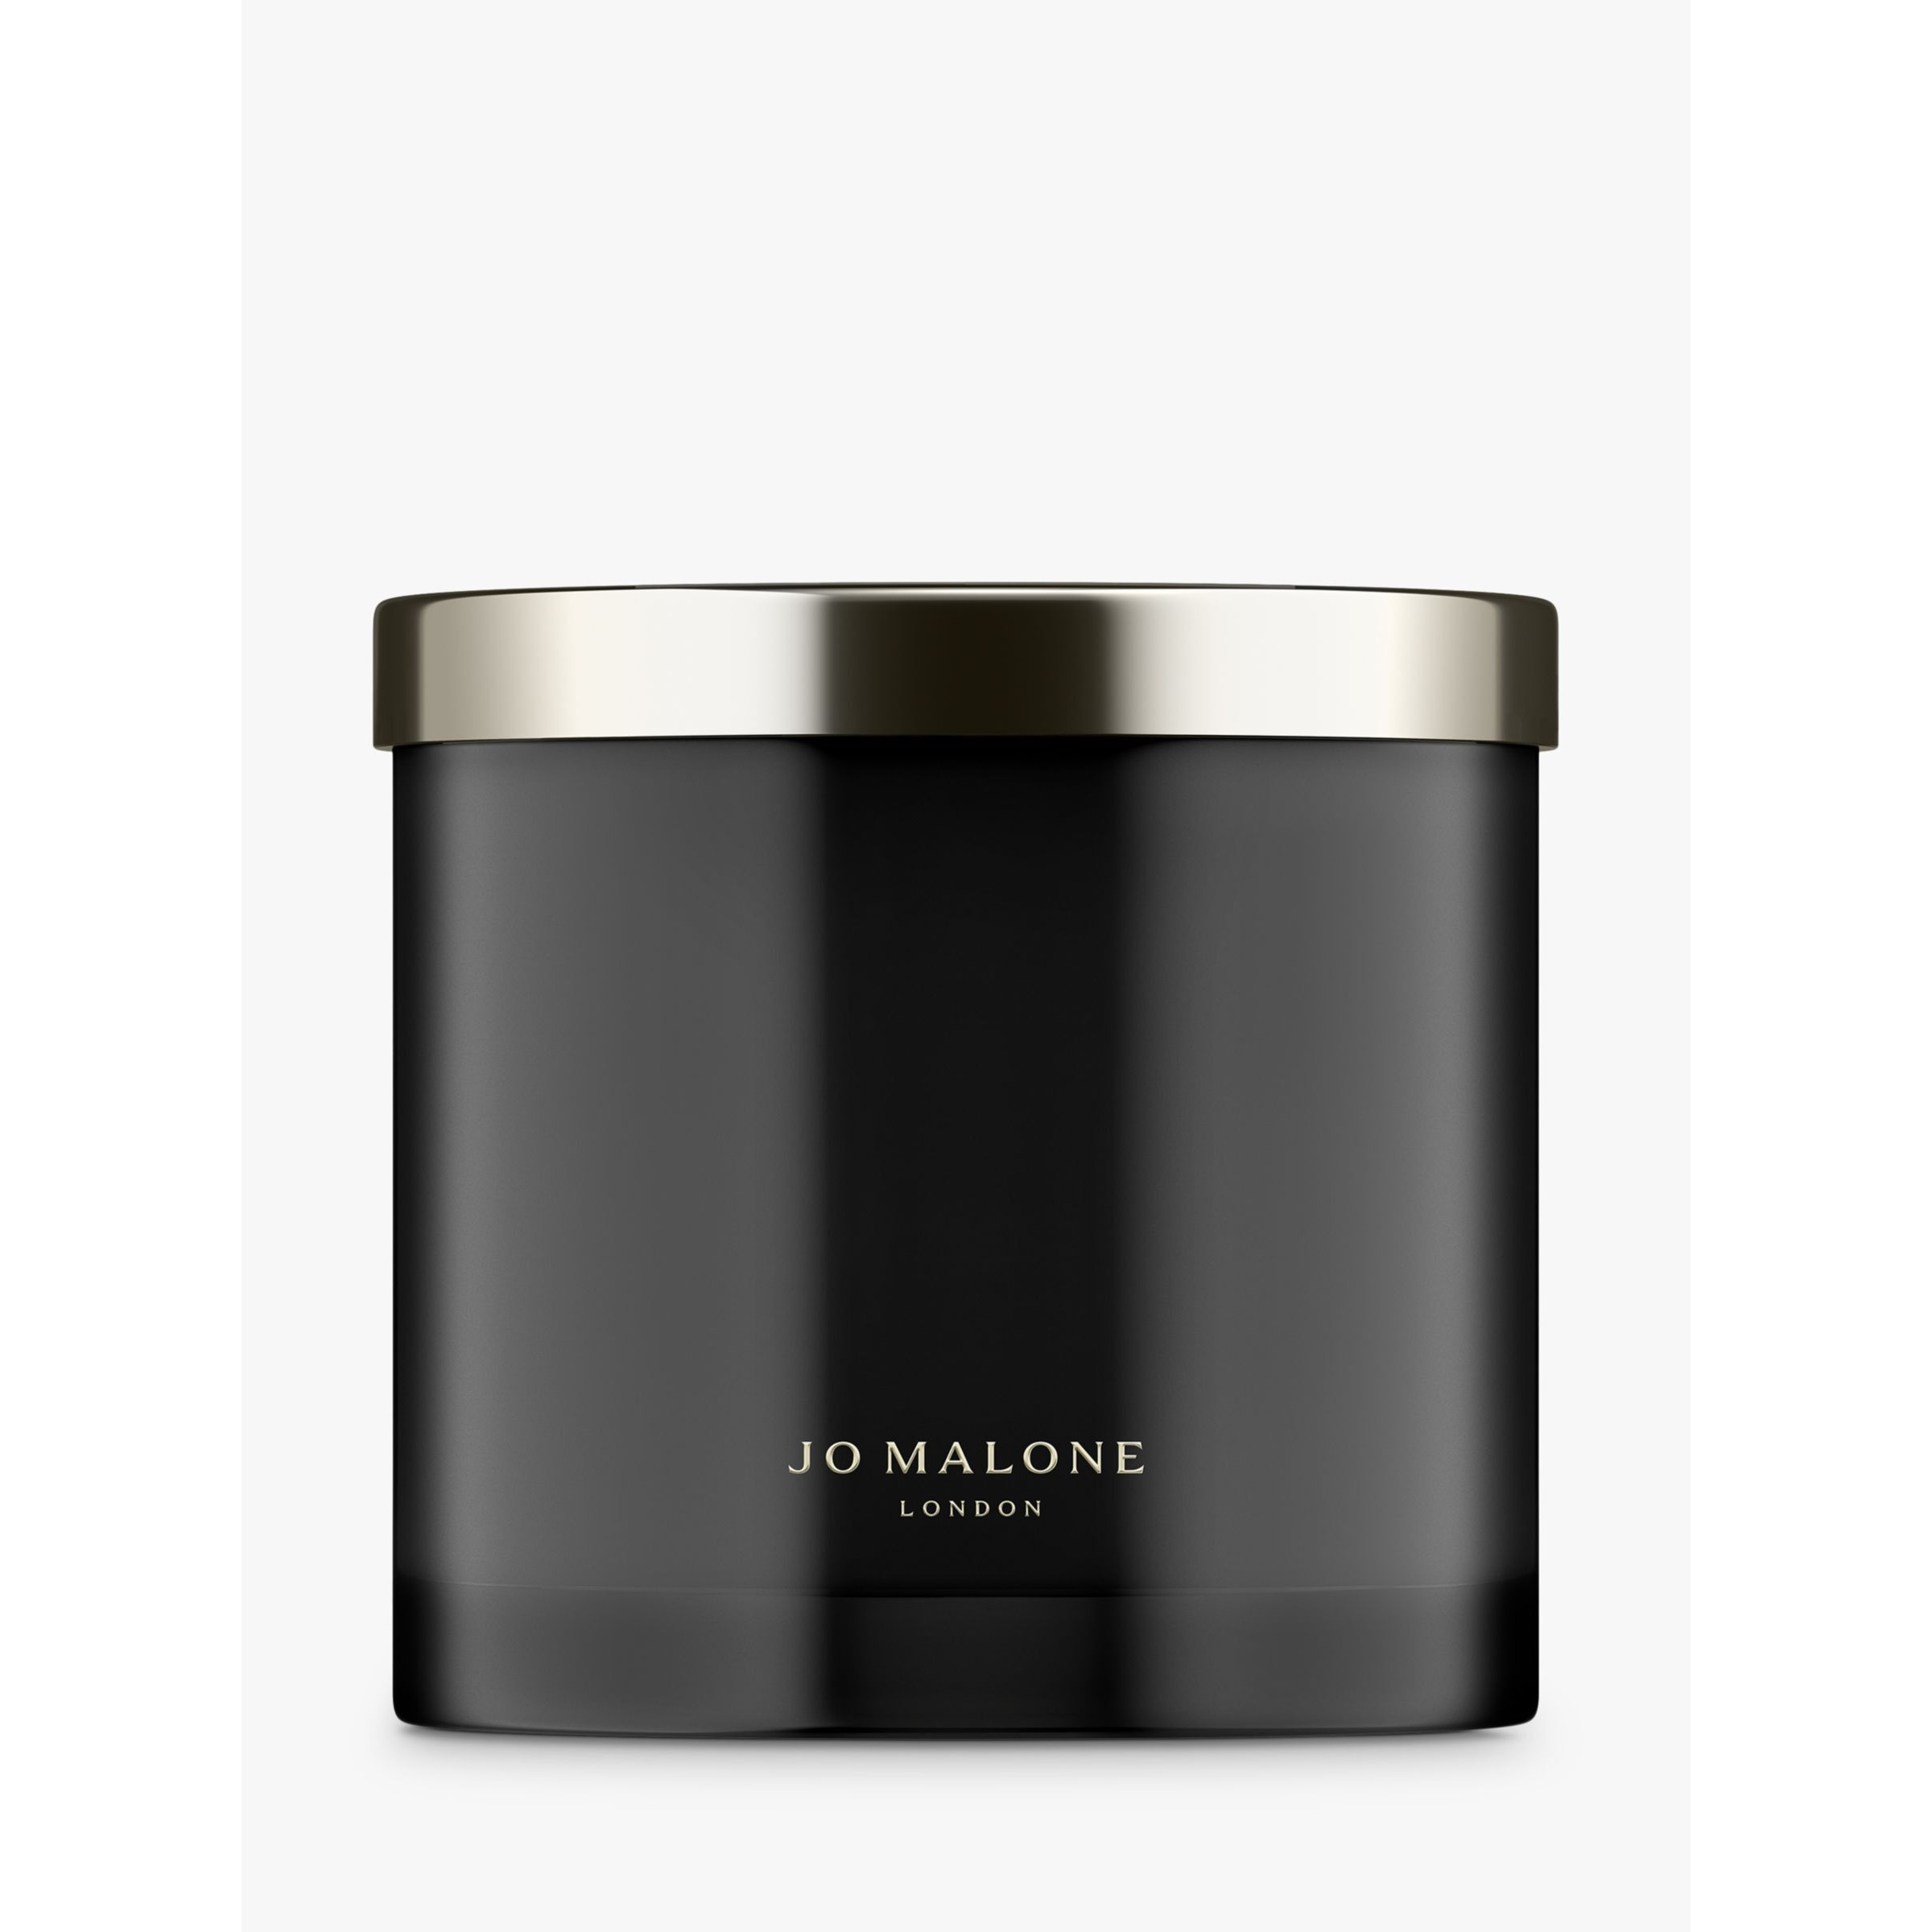 Jo Malone London Velvet Rose & Oud Deluxe Scented Candle, 600g - image 1